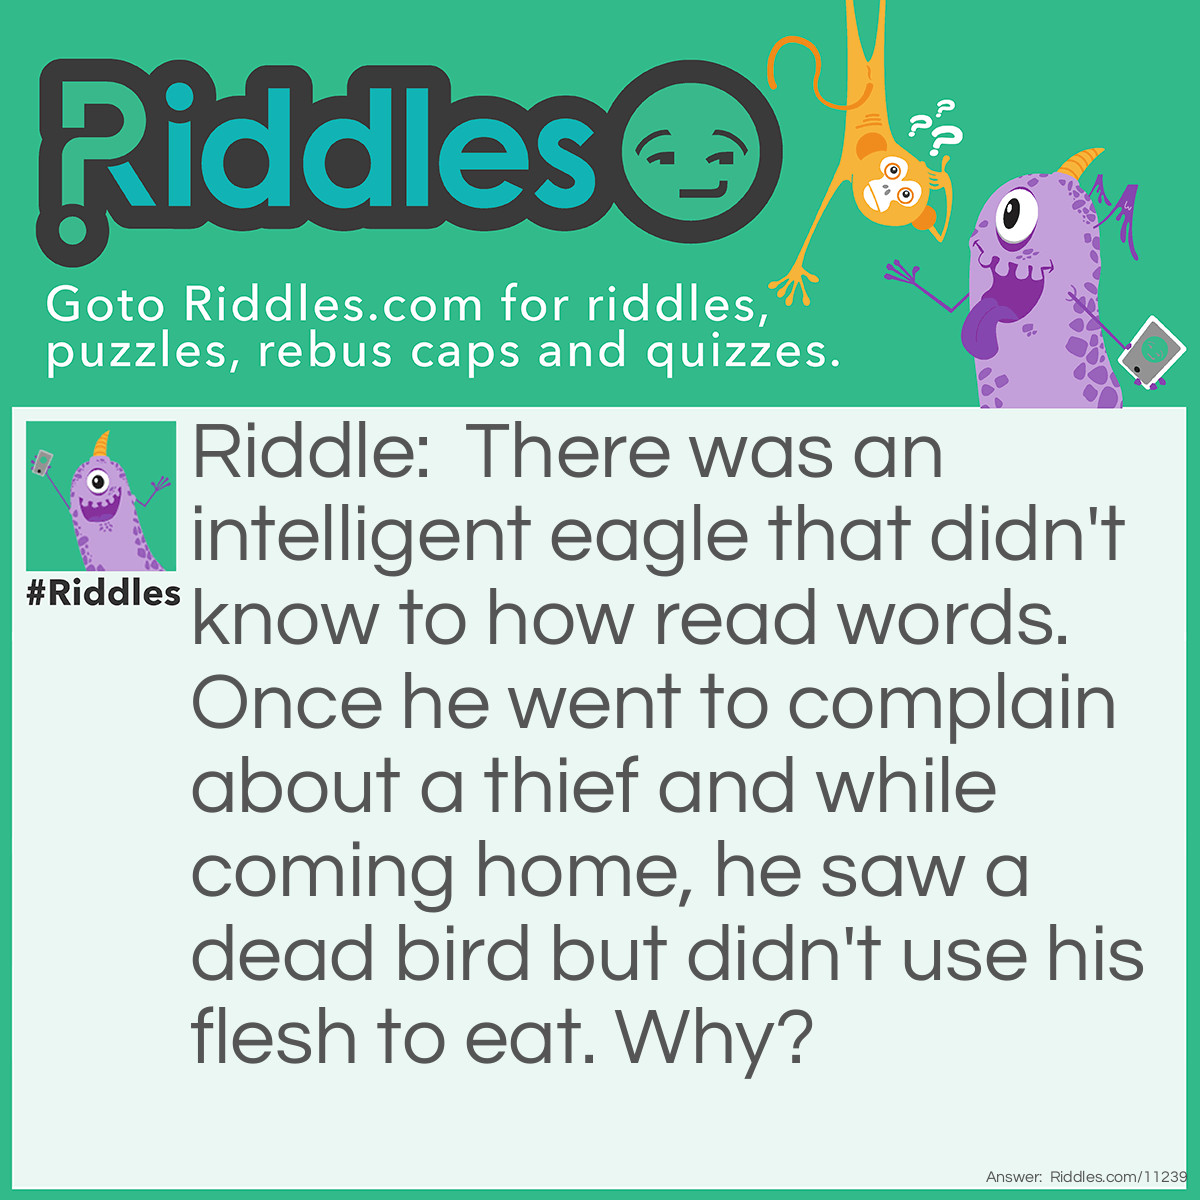 Riddle: There was an intelligent eagle that didn't know to how read words. Once he went to complain about a thief and while coming home, he saw a dead bird but didn't use his flesh to eat. Why? Answer: Because he saw the police station and it is ill-eagle.